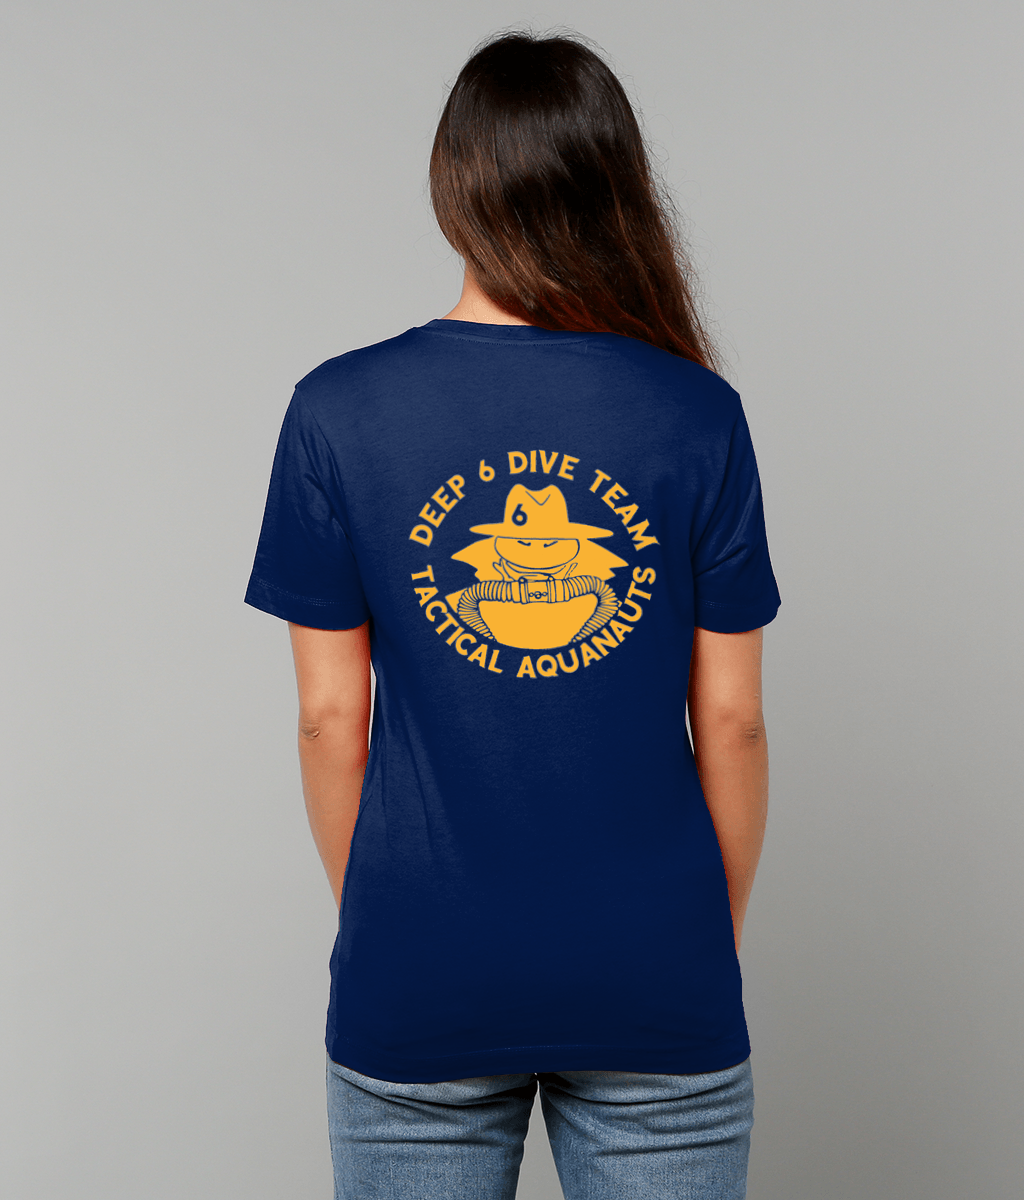 Deep 6 Dive Team - T-Shirt (03) (Printed Front and Back)